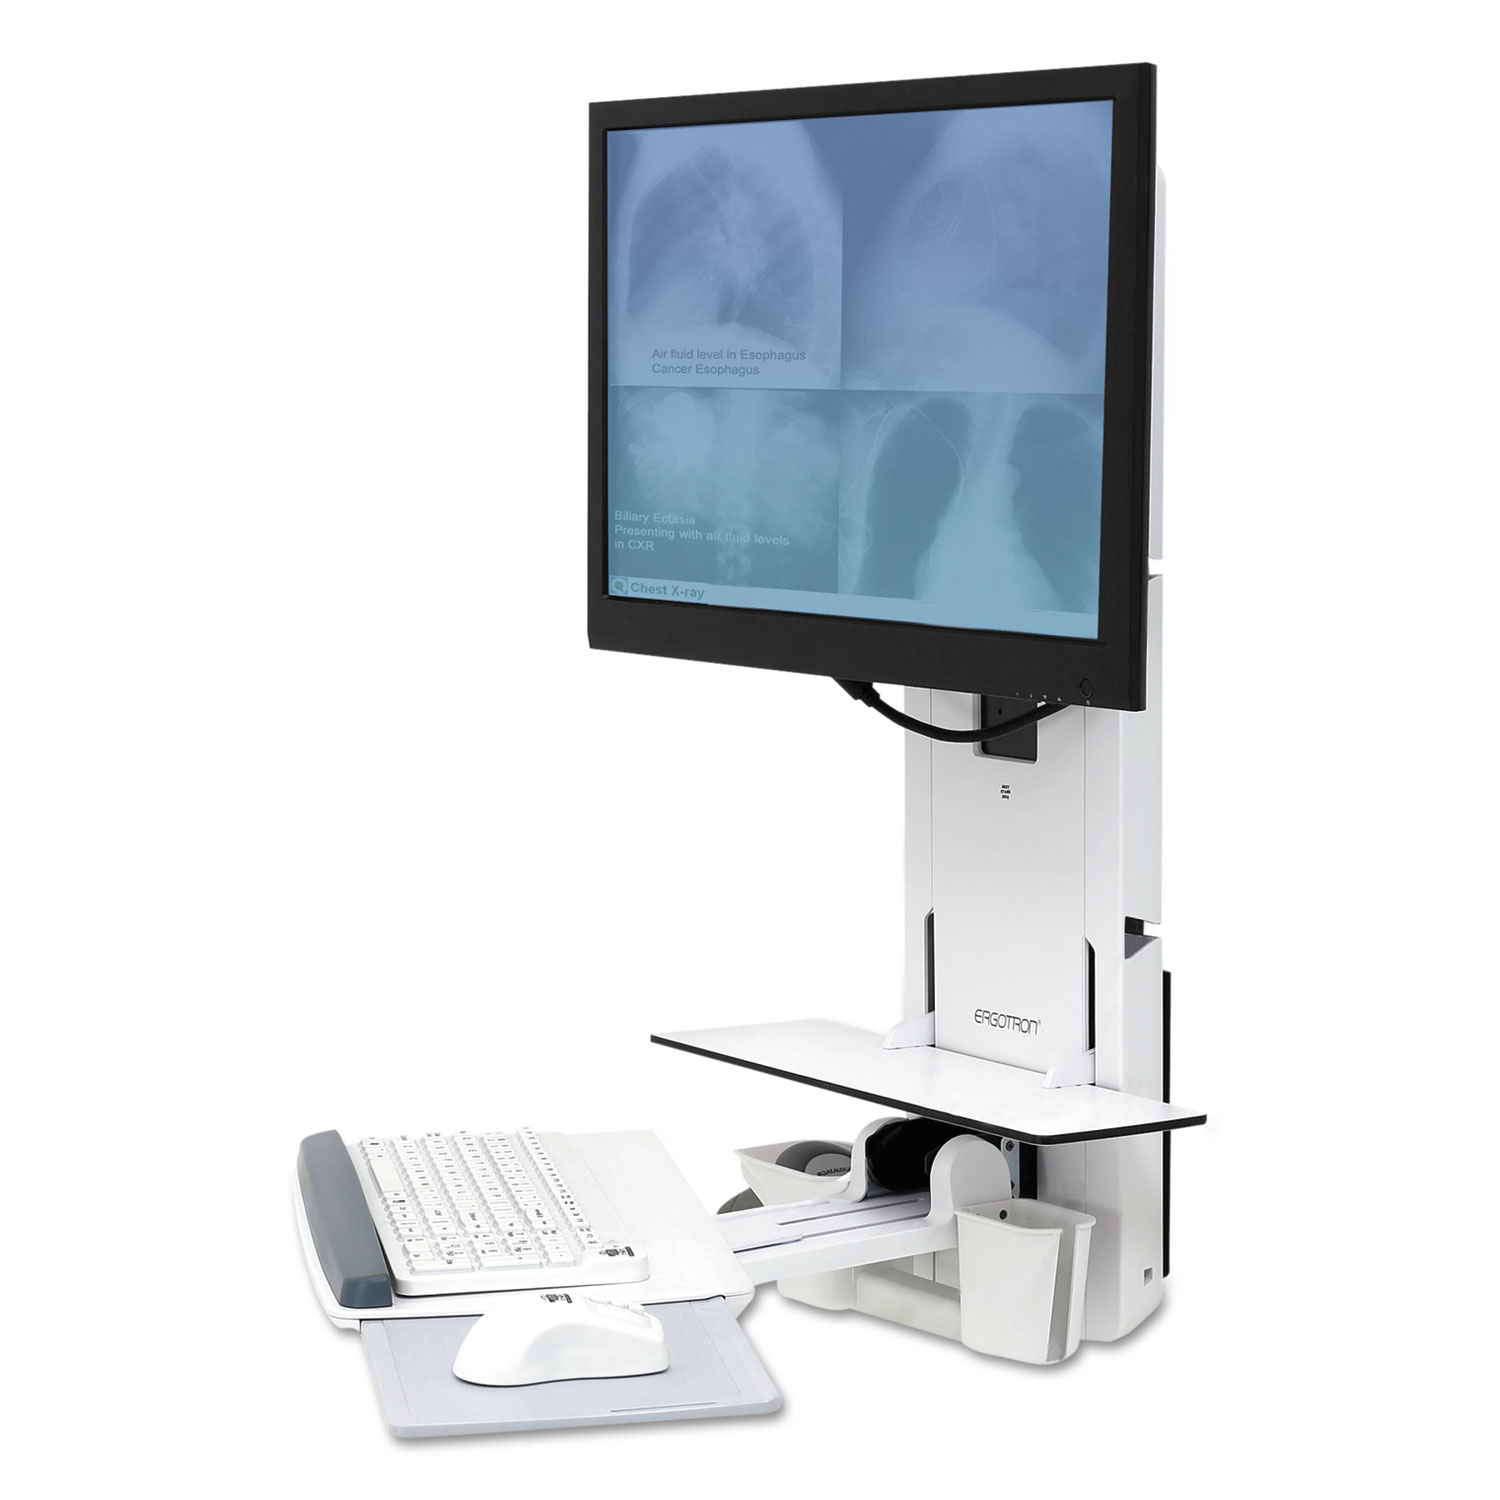  Ergotron 61-080-062 StyleView Sit-Stand Vertical Lift For Patient Rooms, 18.38w x 19.88d x 29h, White (ERG61080062) 